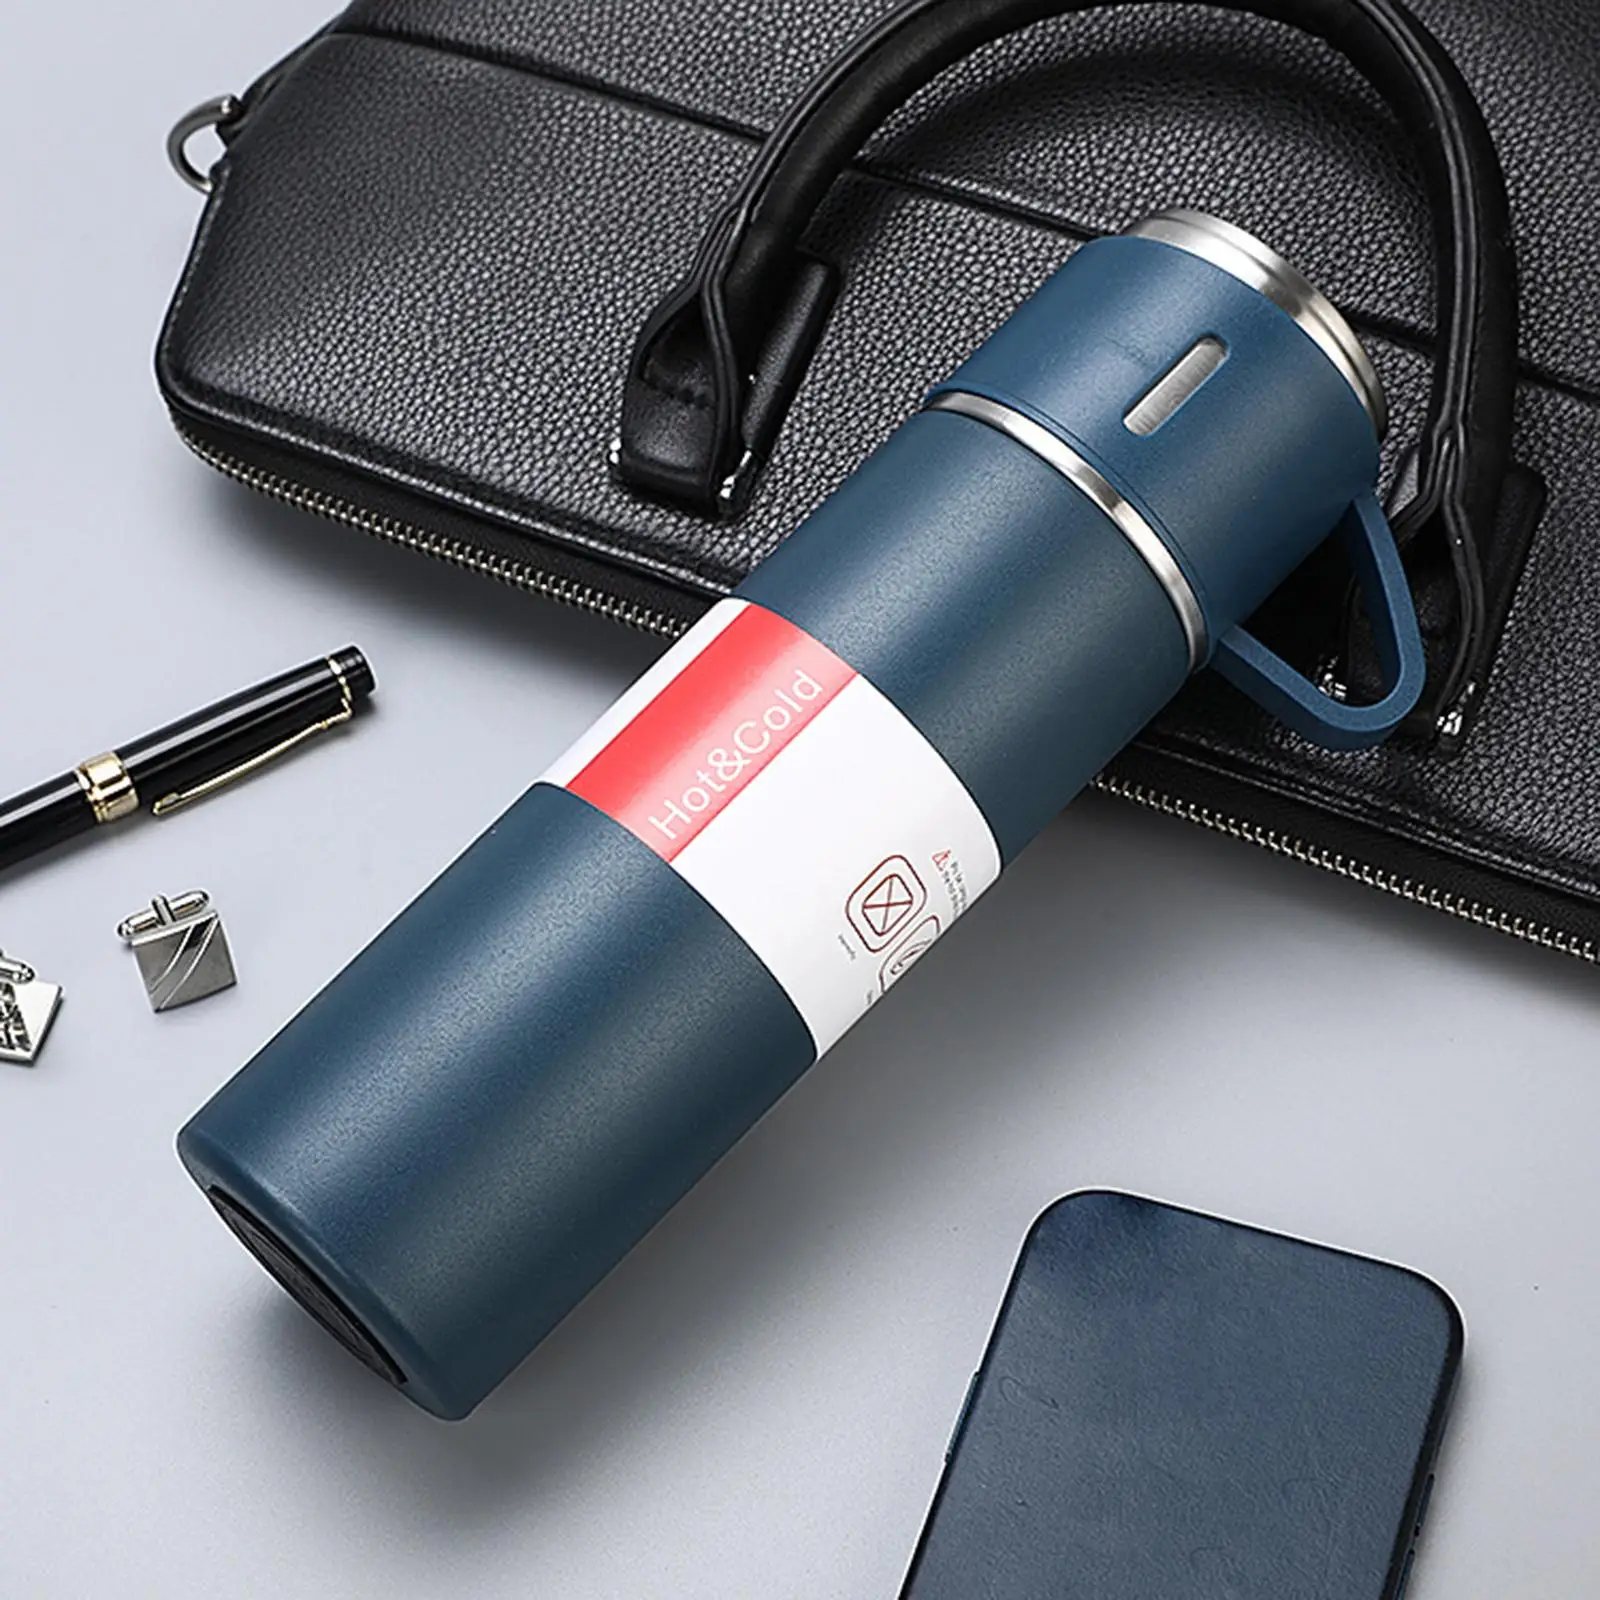 Vacuum Bottle Business Trip Water Bottle up to 12 Hours Vacuum Insulated Beverage Bottle Vacuum Insulated Jug for Camping Gifts